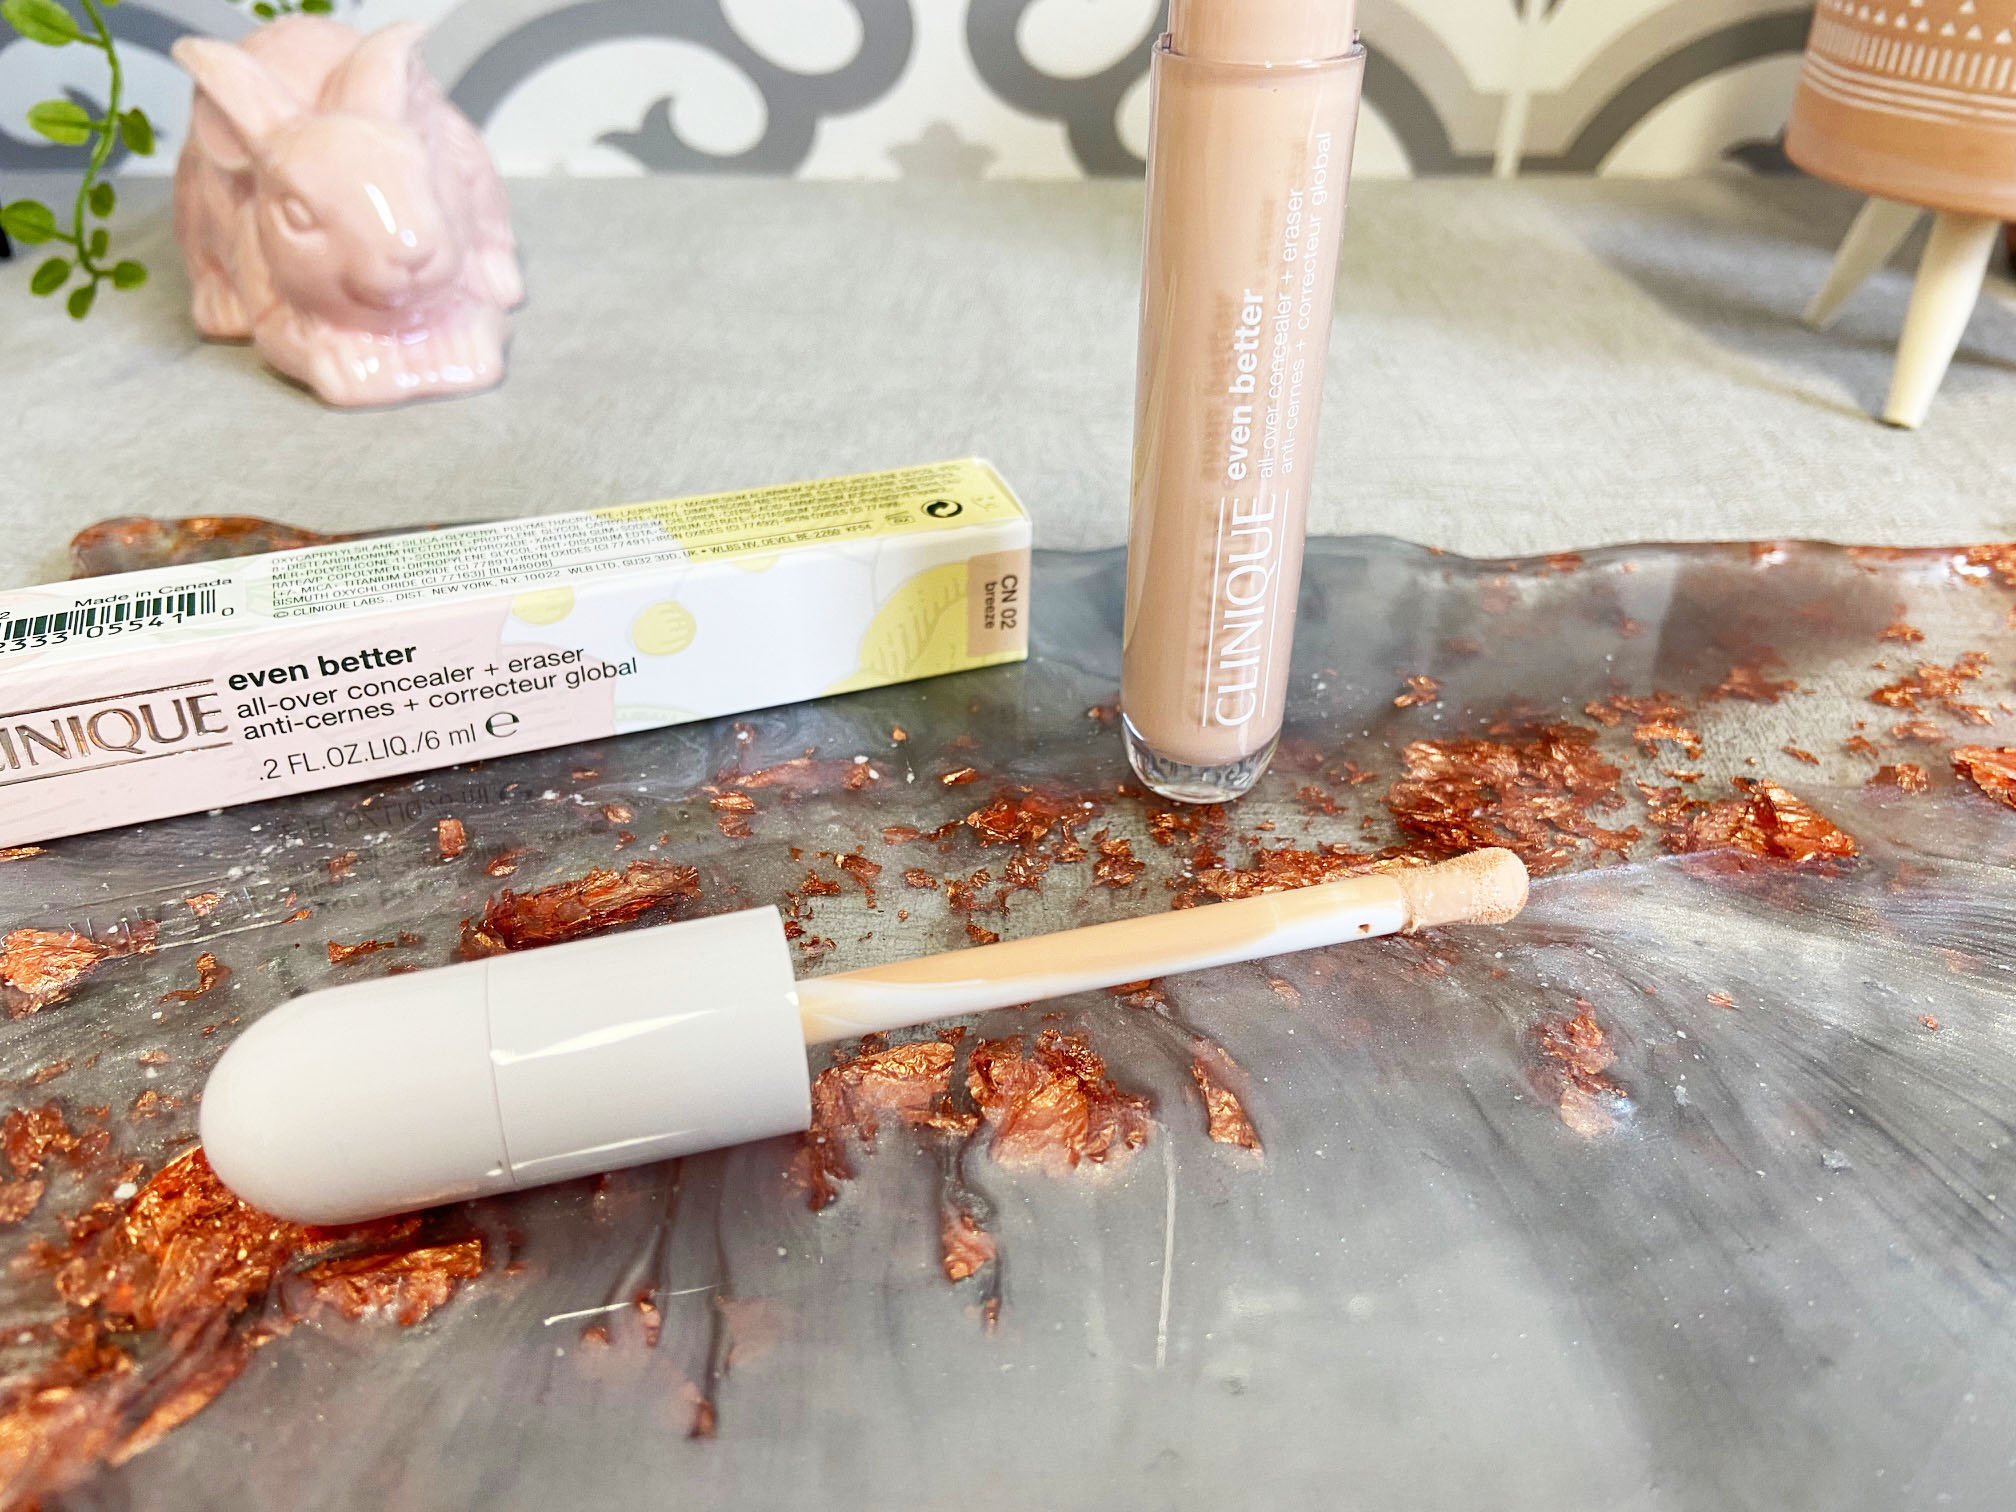 Trying Five Concealers - Even Better Concealer, Iconic London Seamless Concealer, Laura Mercier Flawless Concealer, Milani Supercharged Undereye Tint & 10 Doll Skin TCE Concealer | Kathryn's Loves